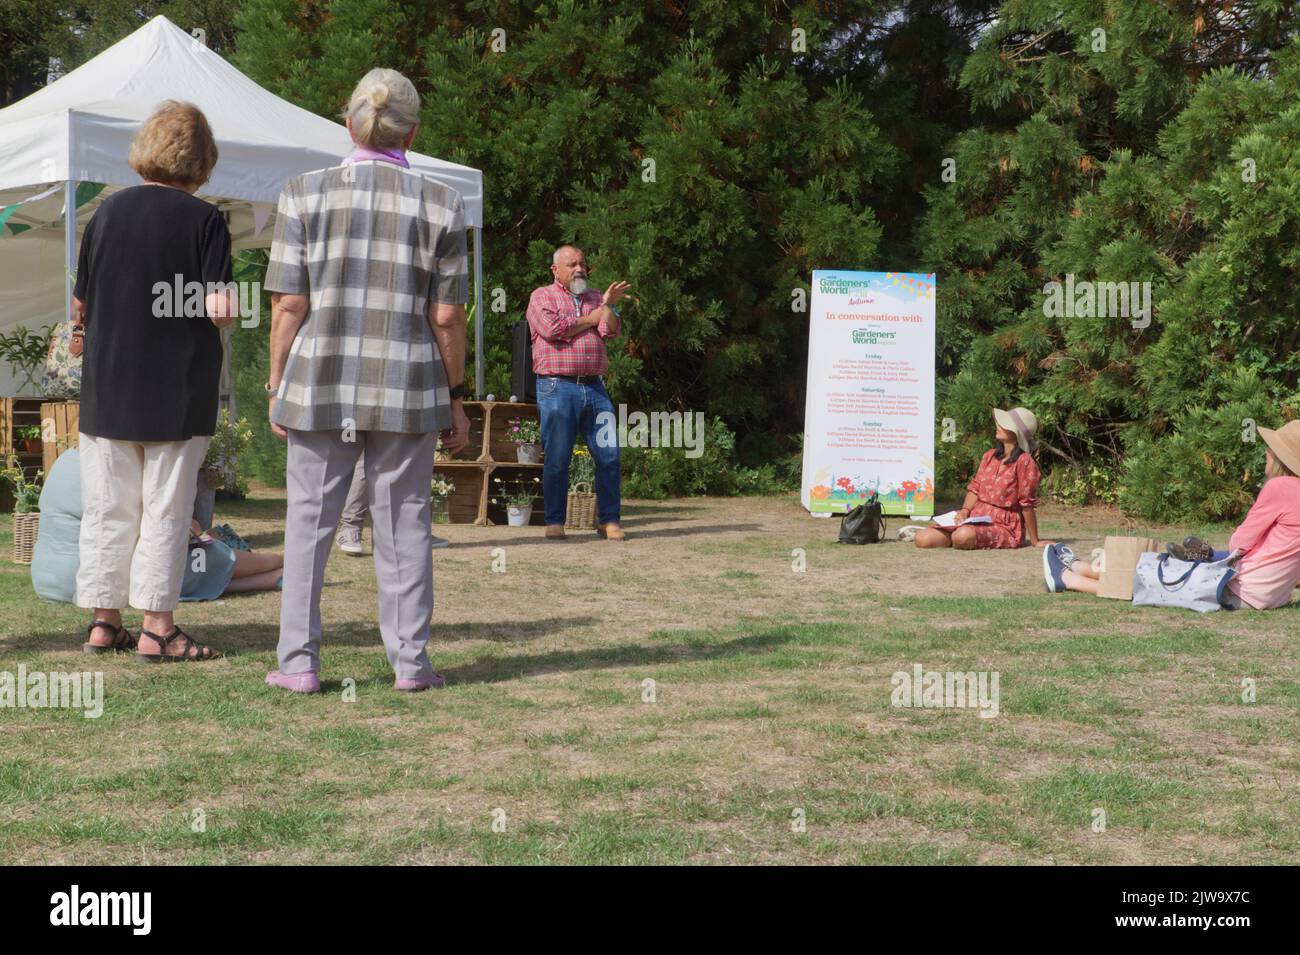 David Hurrion, a plant expert, giving a talk at the inaugural Gardeners World Autumn Fair 2022 held at Audley End in Essex. Stock Photo